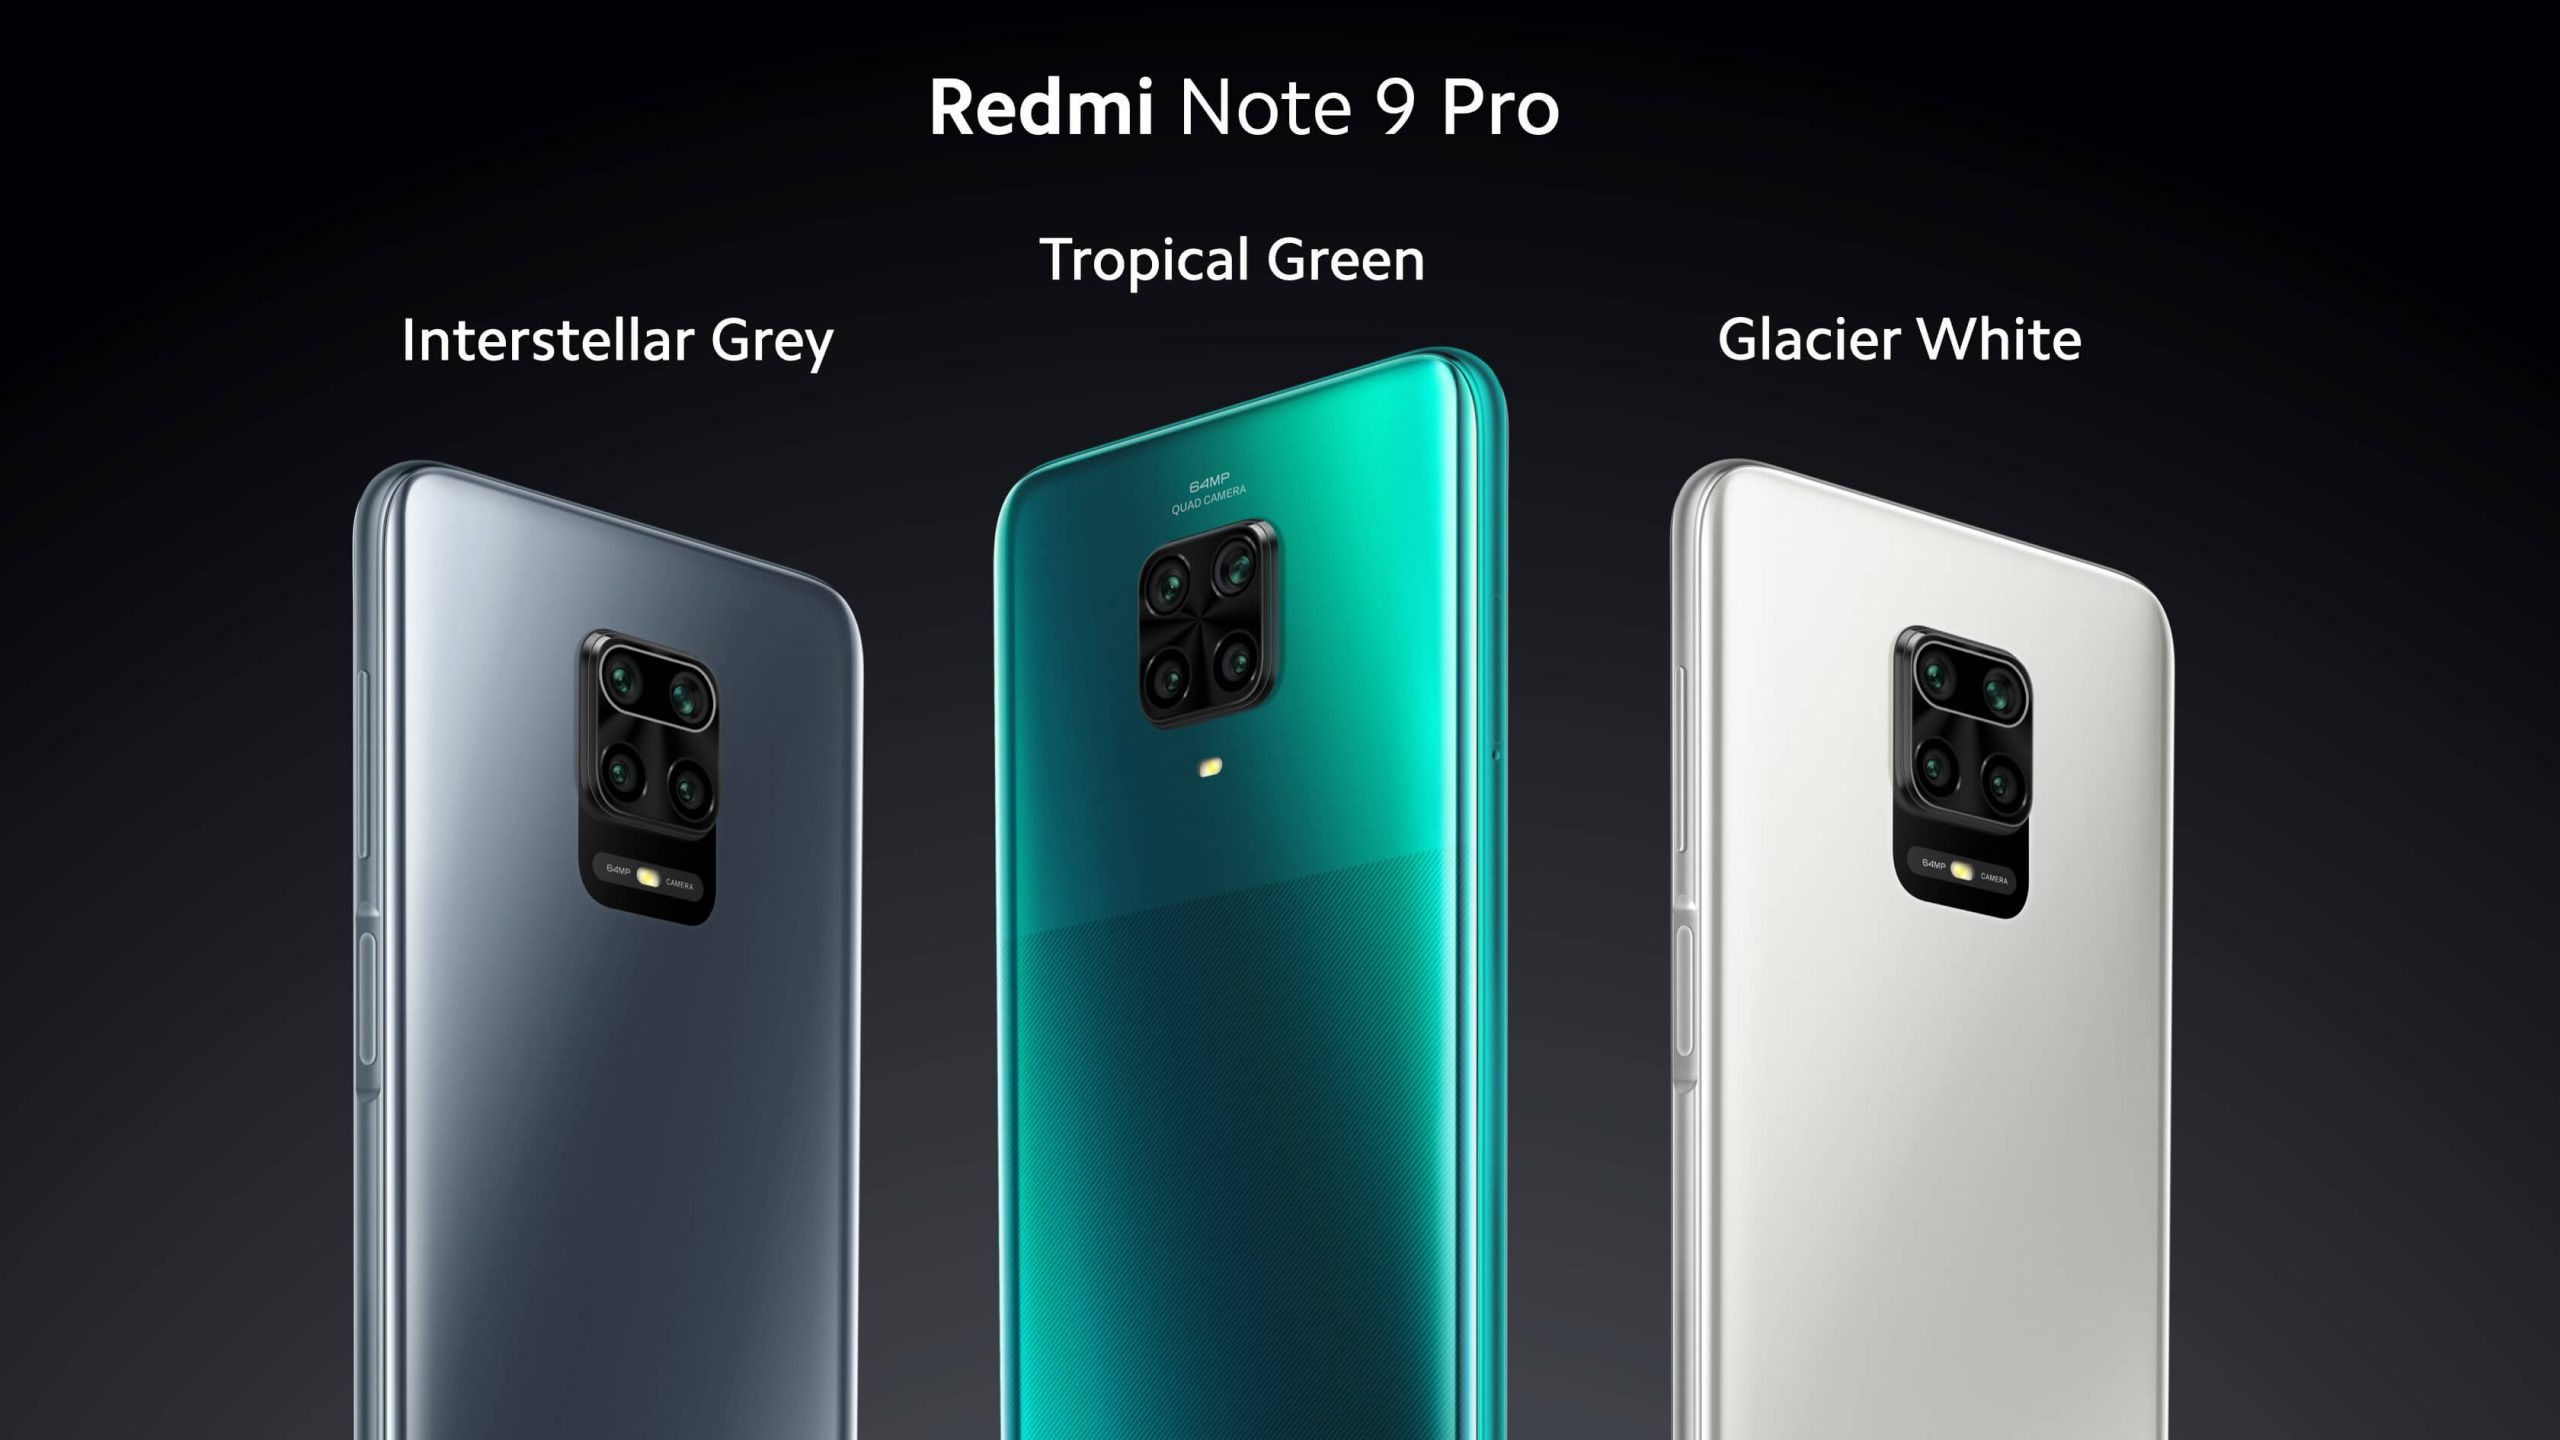 European Redmi Note 9 Pro This Is The Best Price Xiaomi Planet